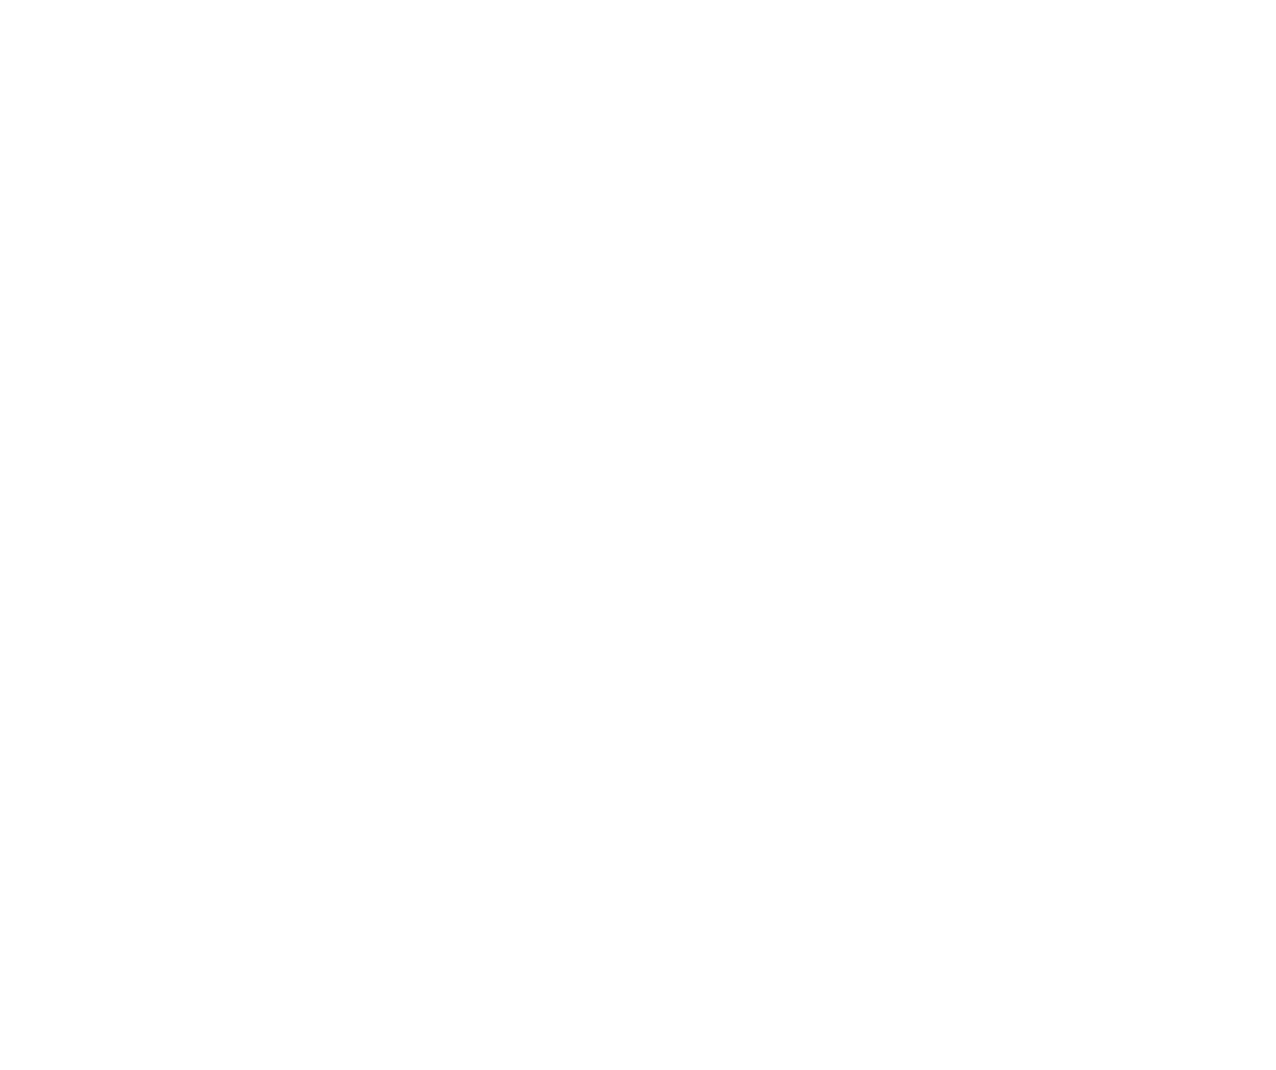 Mrs. Clever